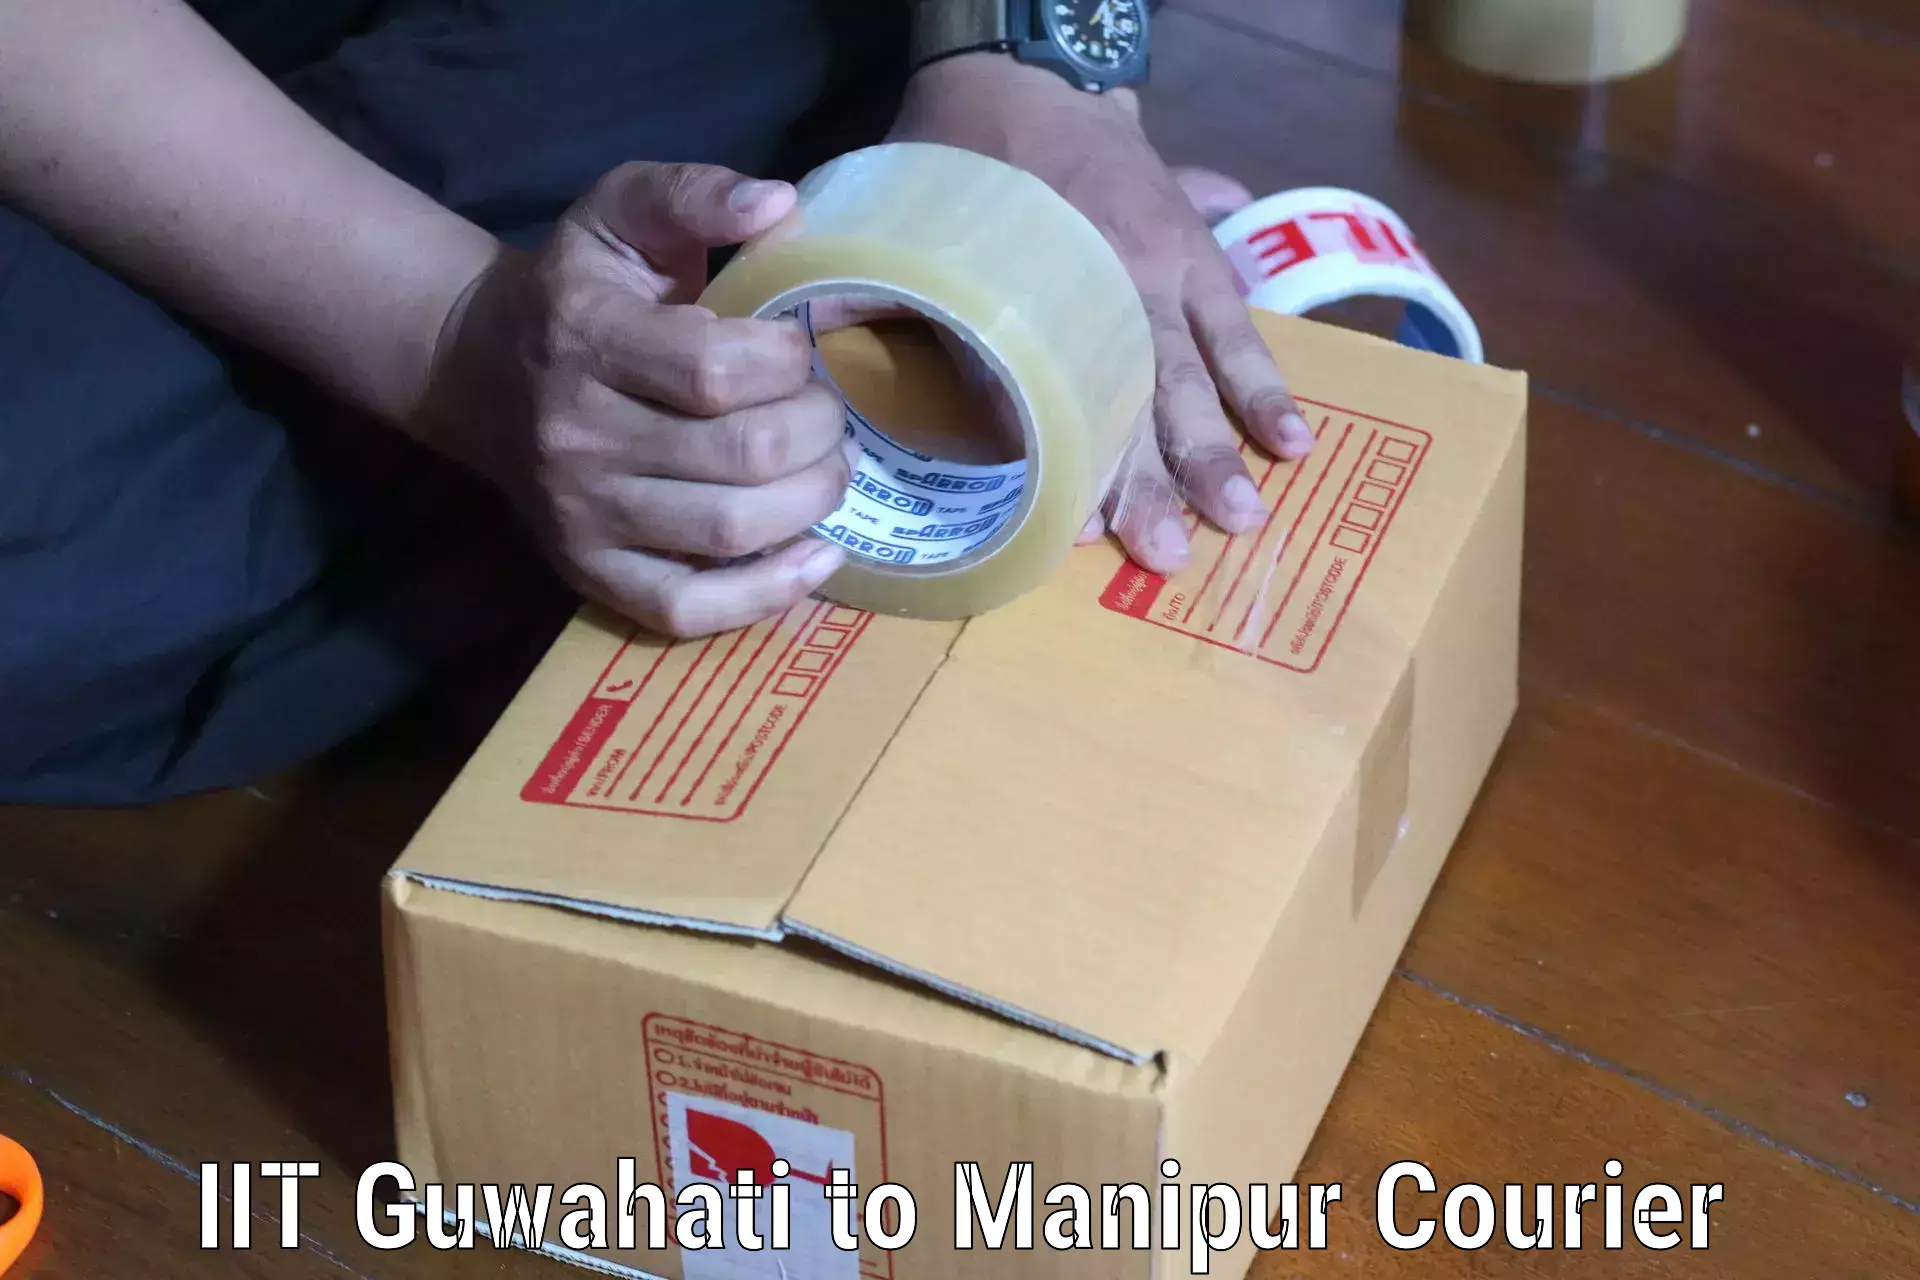 24/7 courier service IIT Guwahati to Imphal